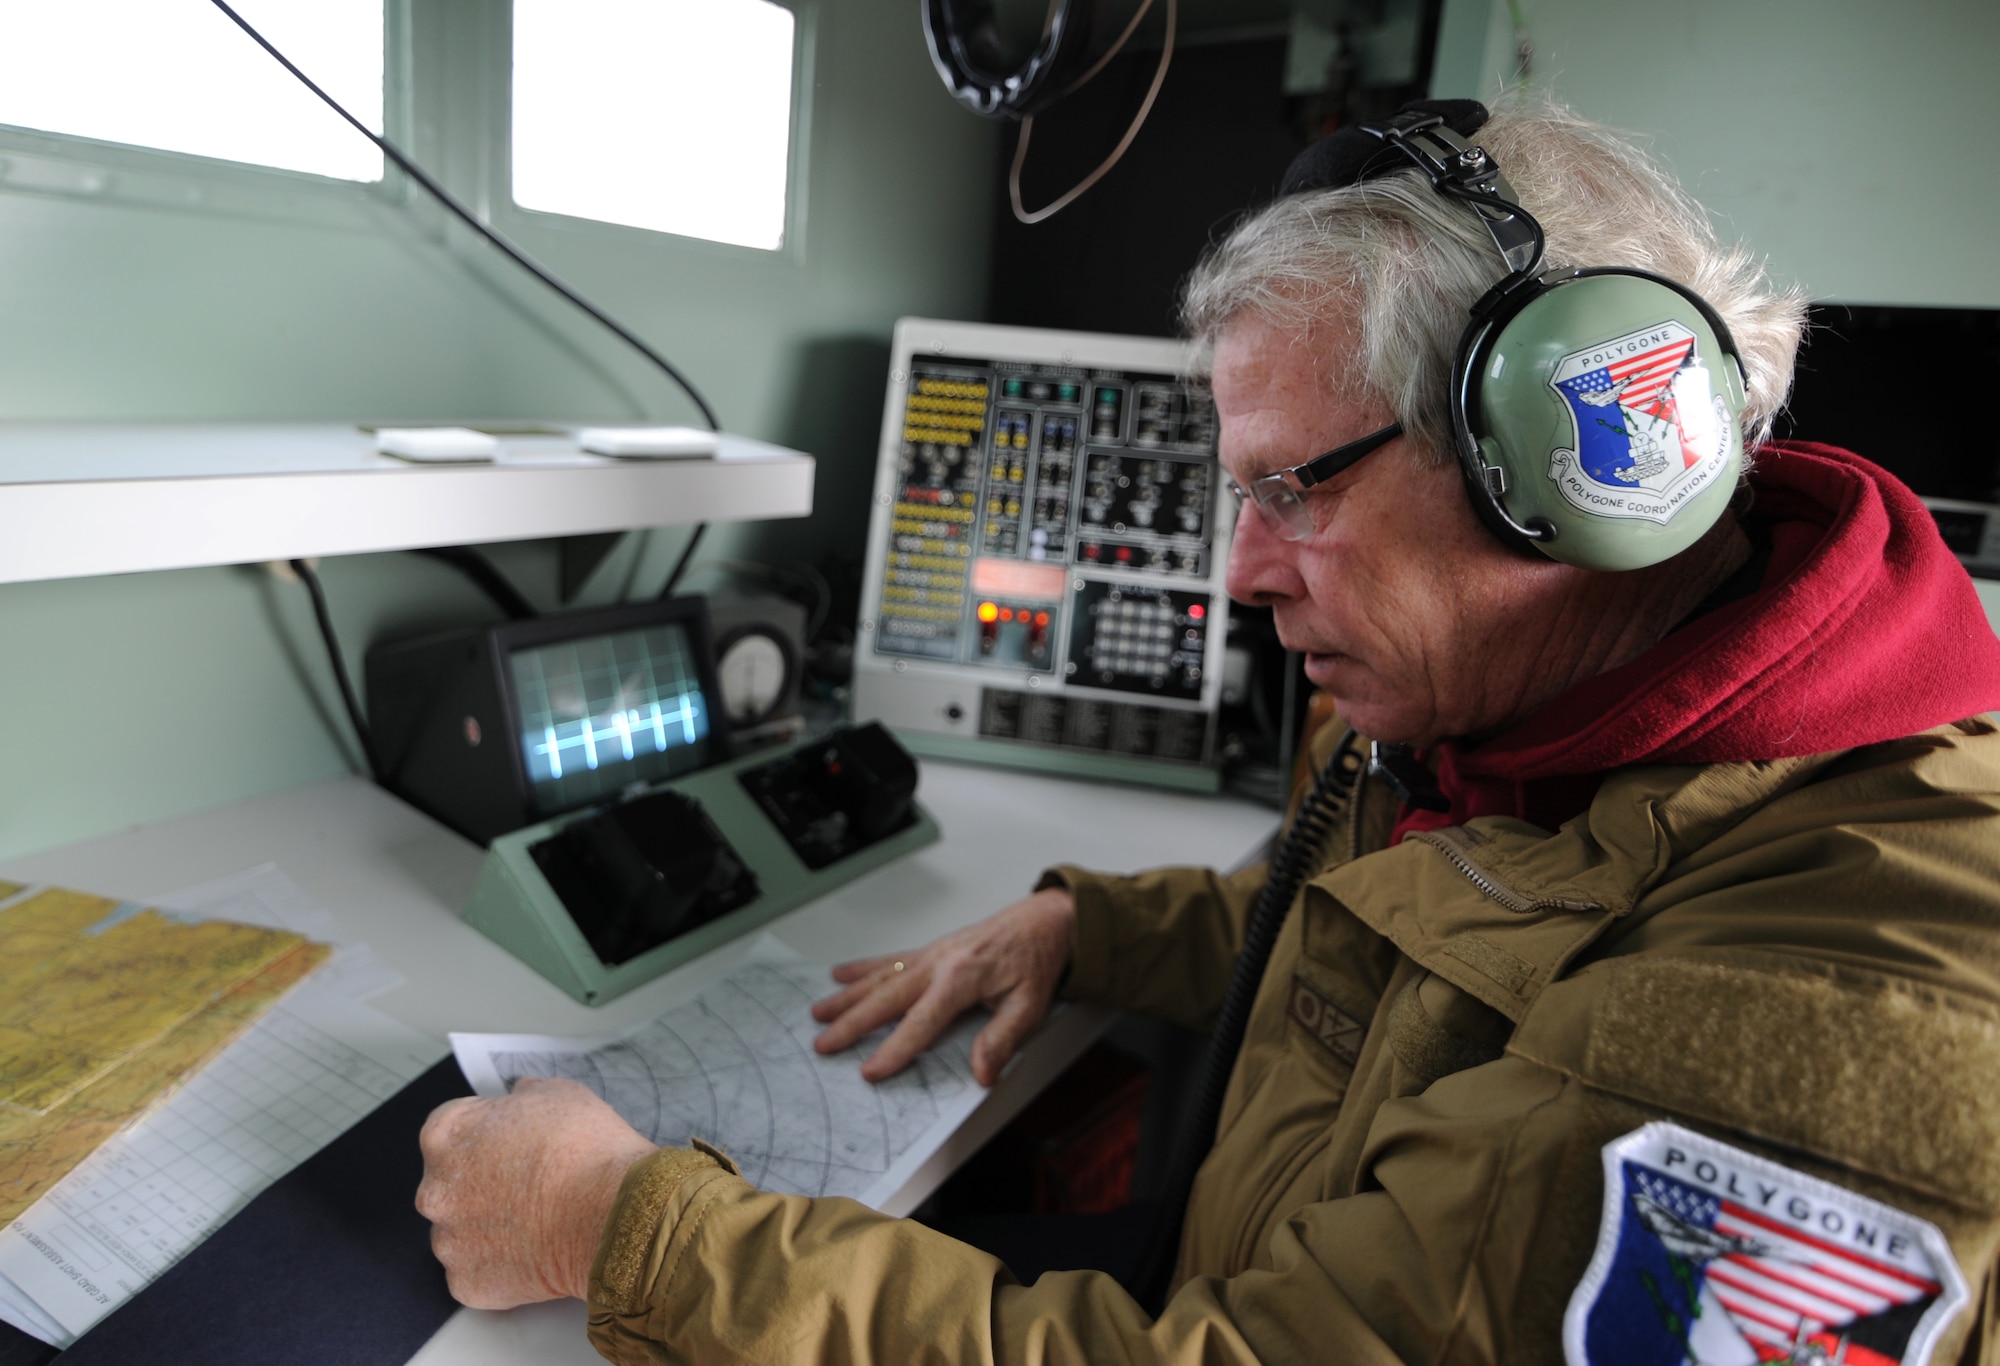 Jack Graham, a Polygone radar technician, reviews a map of the surrounding area inside a tactical radar threat generator during Anatolian Falcon 2012 in Konya, Turkey, March 8, 2012. Graham operated the radar, tracking participating aircraft in the exercise to provide a simulated ground threat capability. (U.S. Air Force photo/Staff Sgt. Benjamin Wilson)